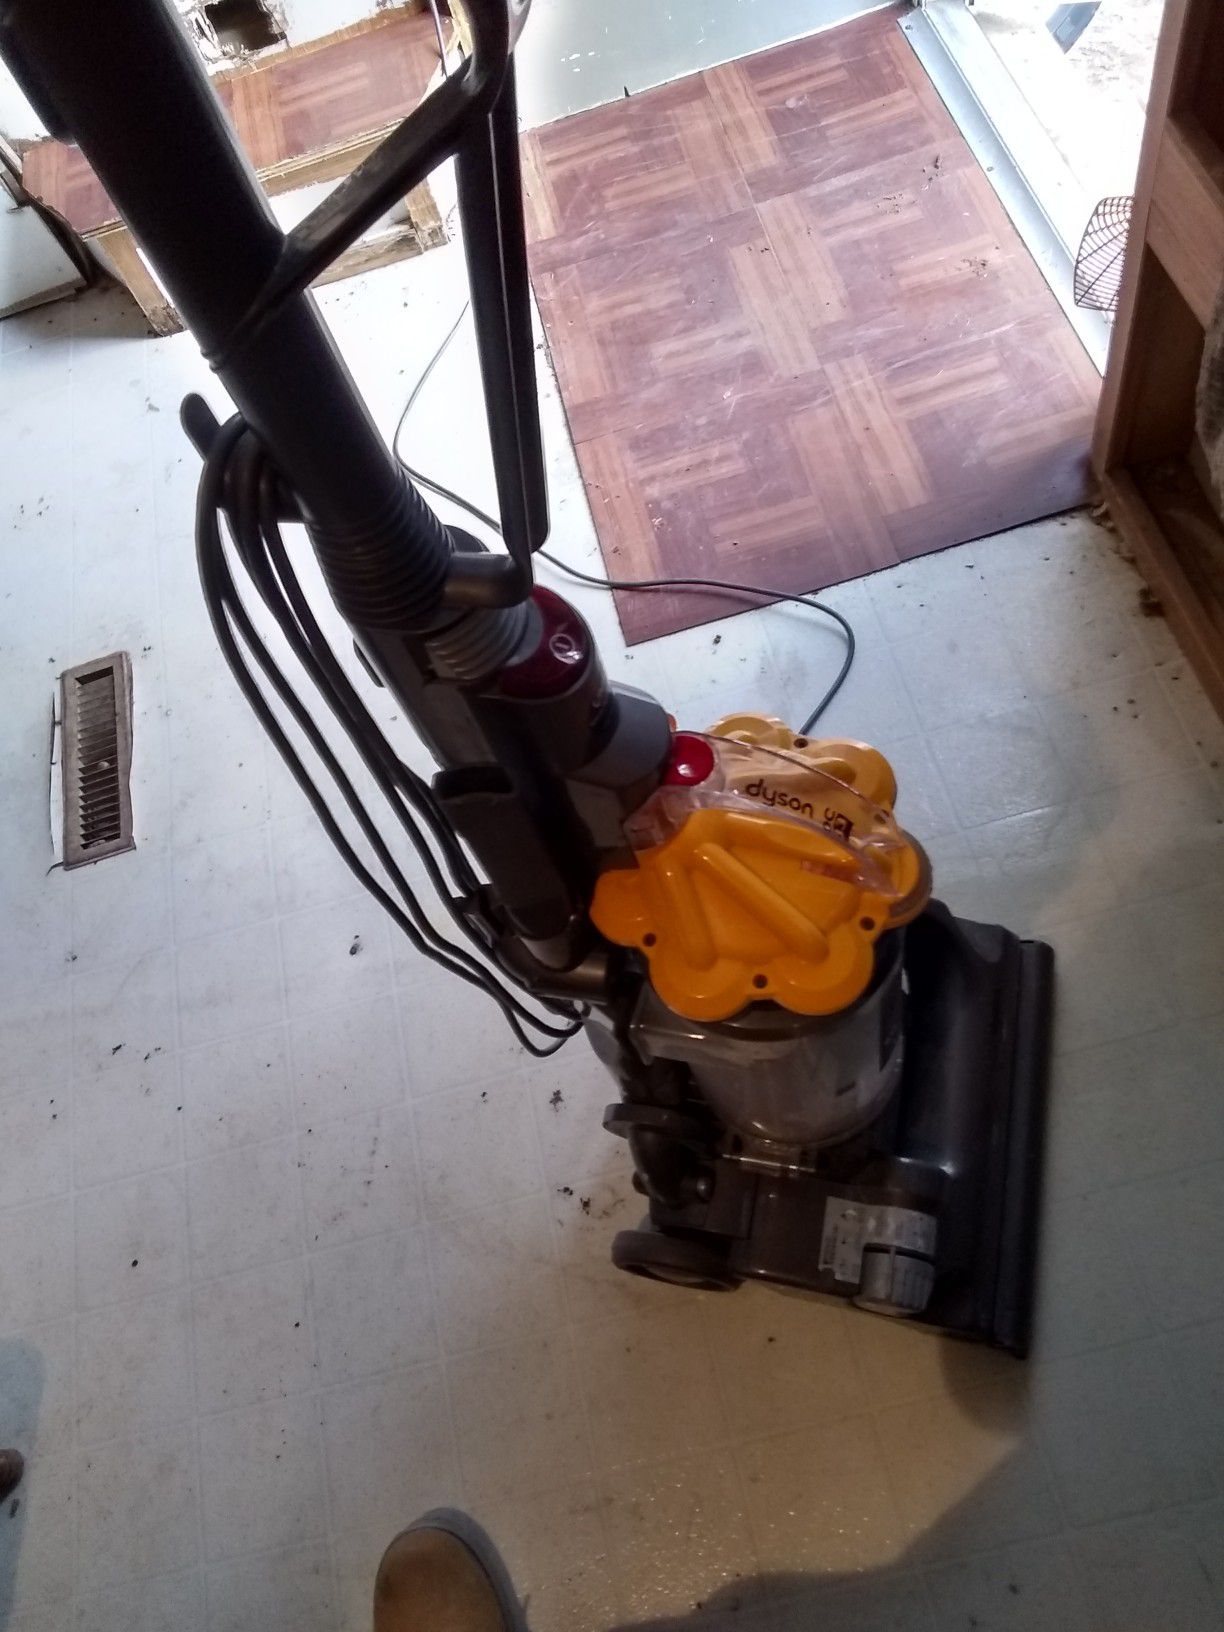 I have a great working DYSON DC33 multi floor upright vacuum with all attachmens in good shape n a new filter,,,225$$$